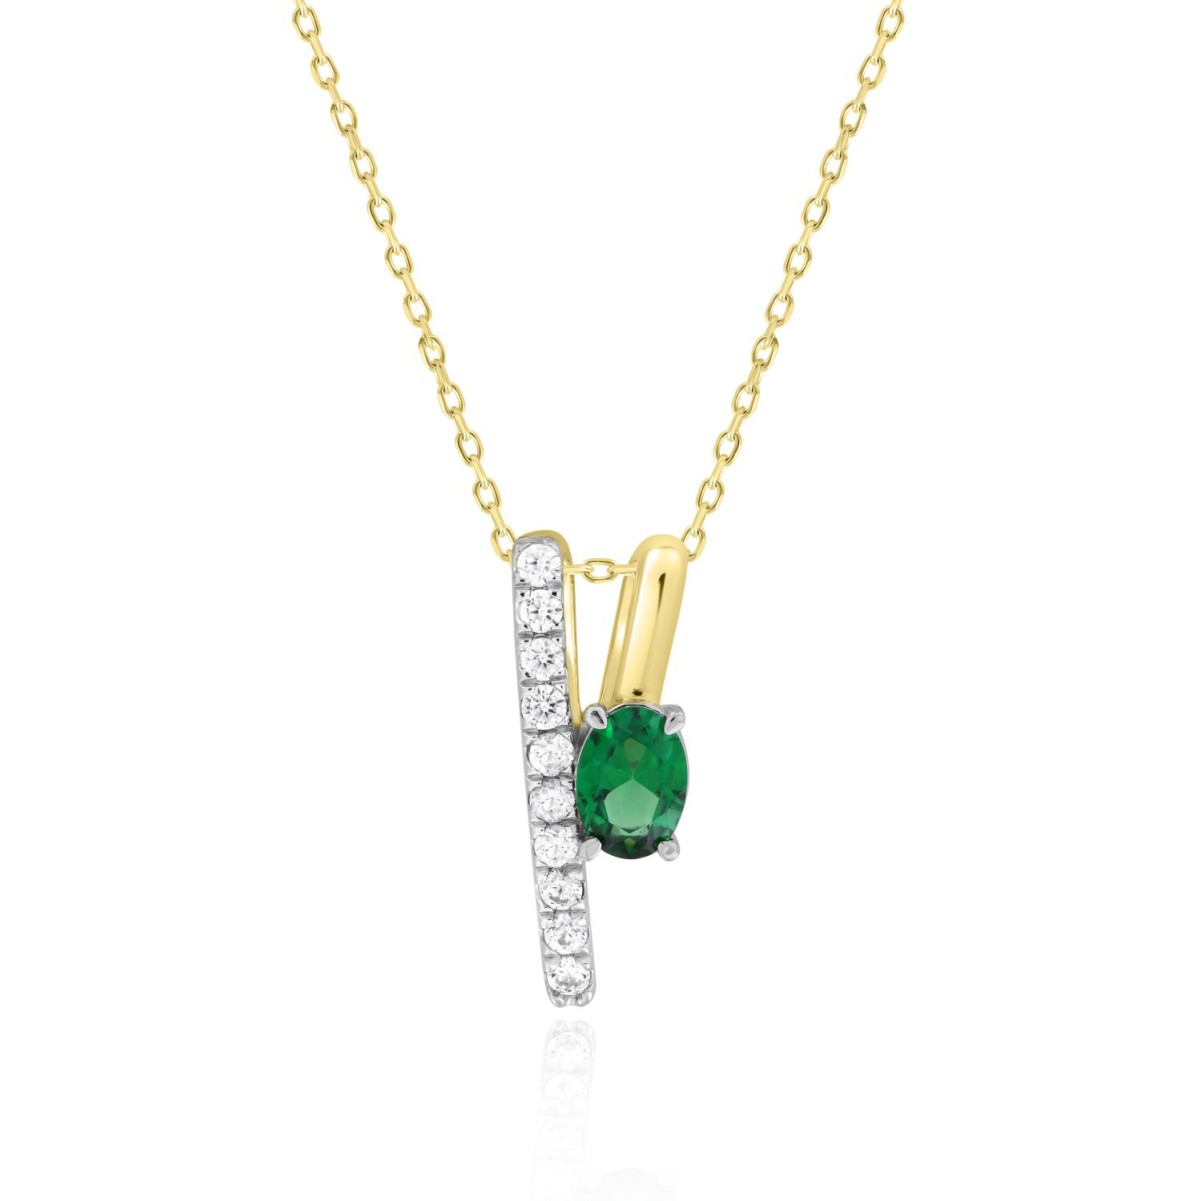 14K YELLOW GOLD 1 1/5CT ROUND/OVAL DIAMOND LADIES PENDANT WITH CHAIN(COLOR STONE OVAL GREEN EMERALD DIAMOND 7/8CT)